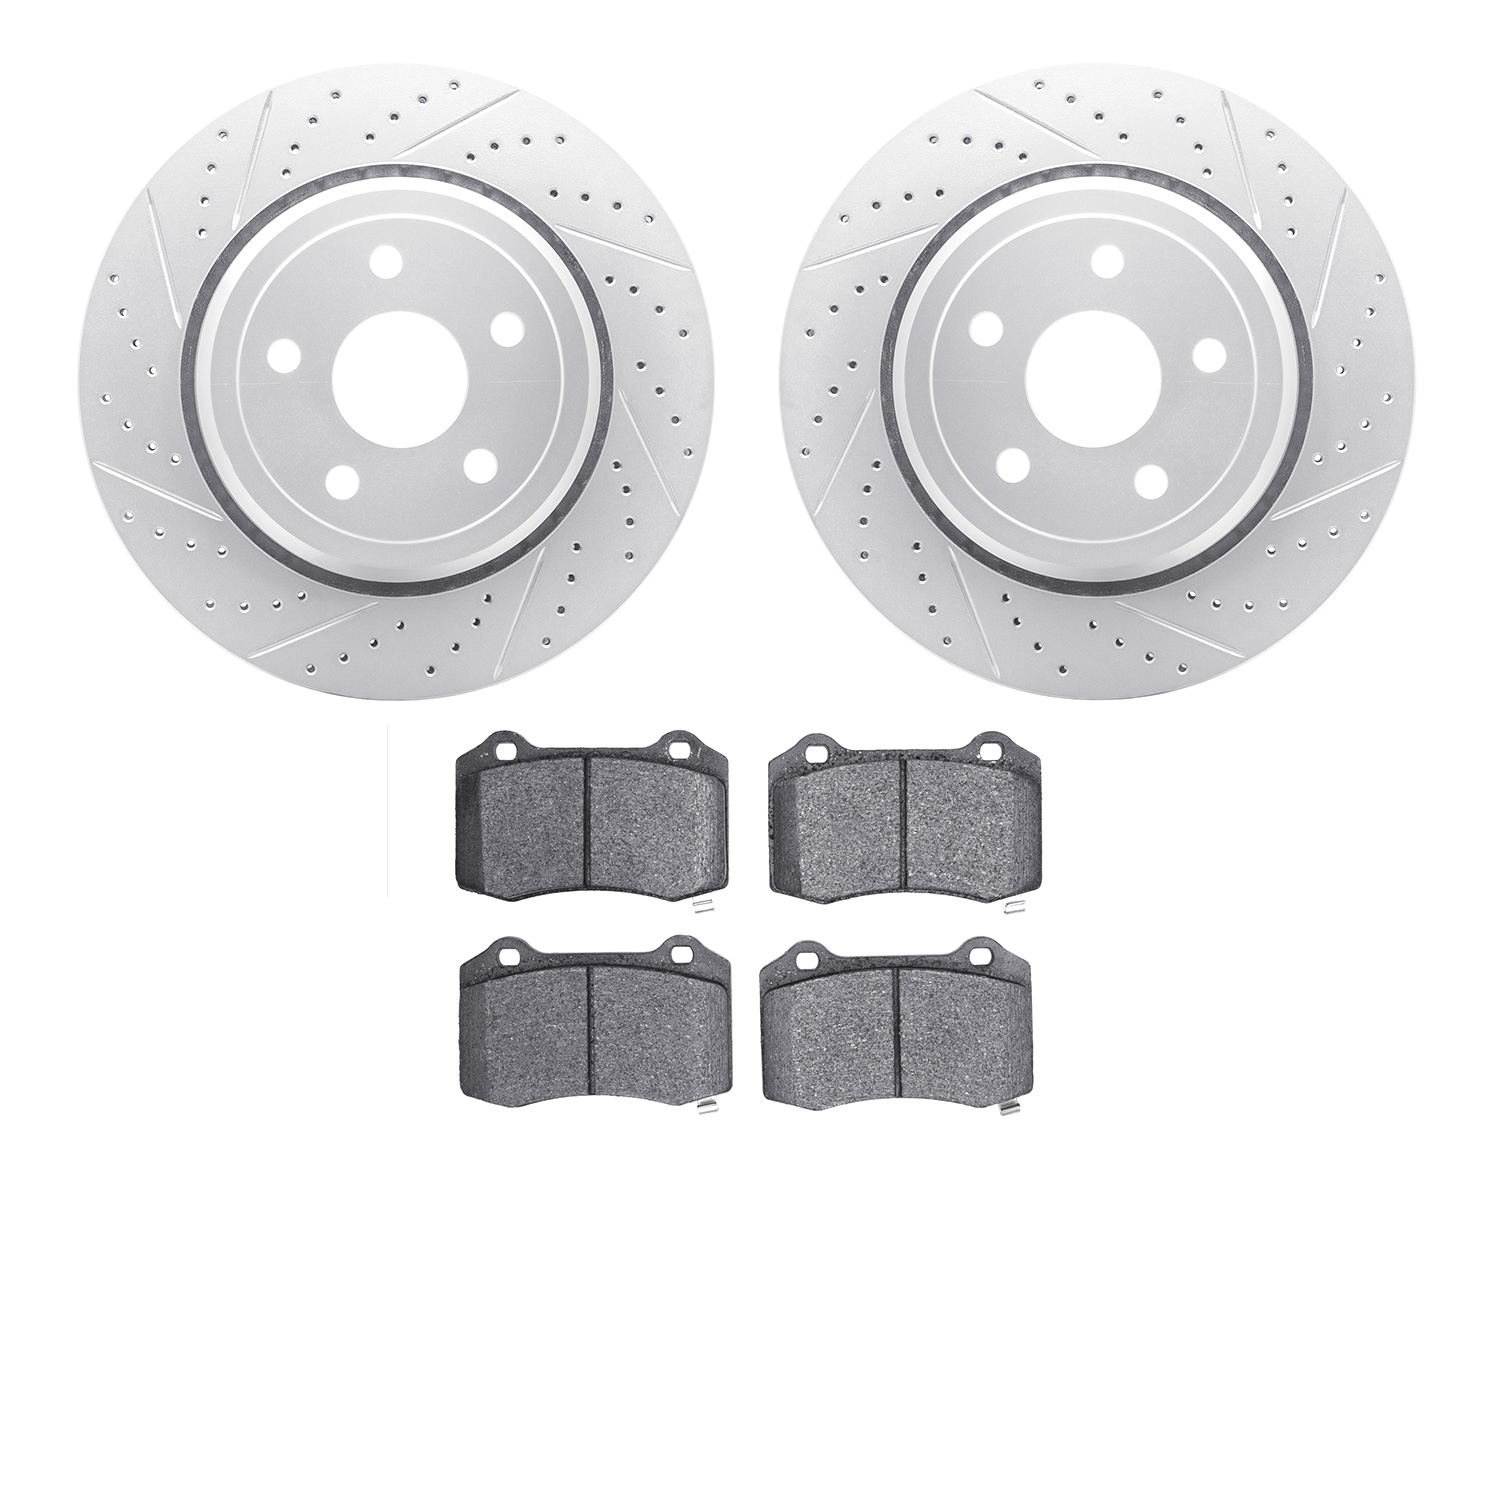 2402-42010 Geoperformance Drilled/Slotted Brake Rotors with Ultimate-Duty Brake Pads Kit, Fits Select Mopar, Position: Rear